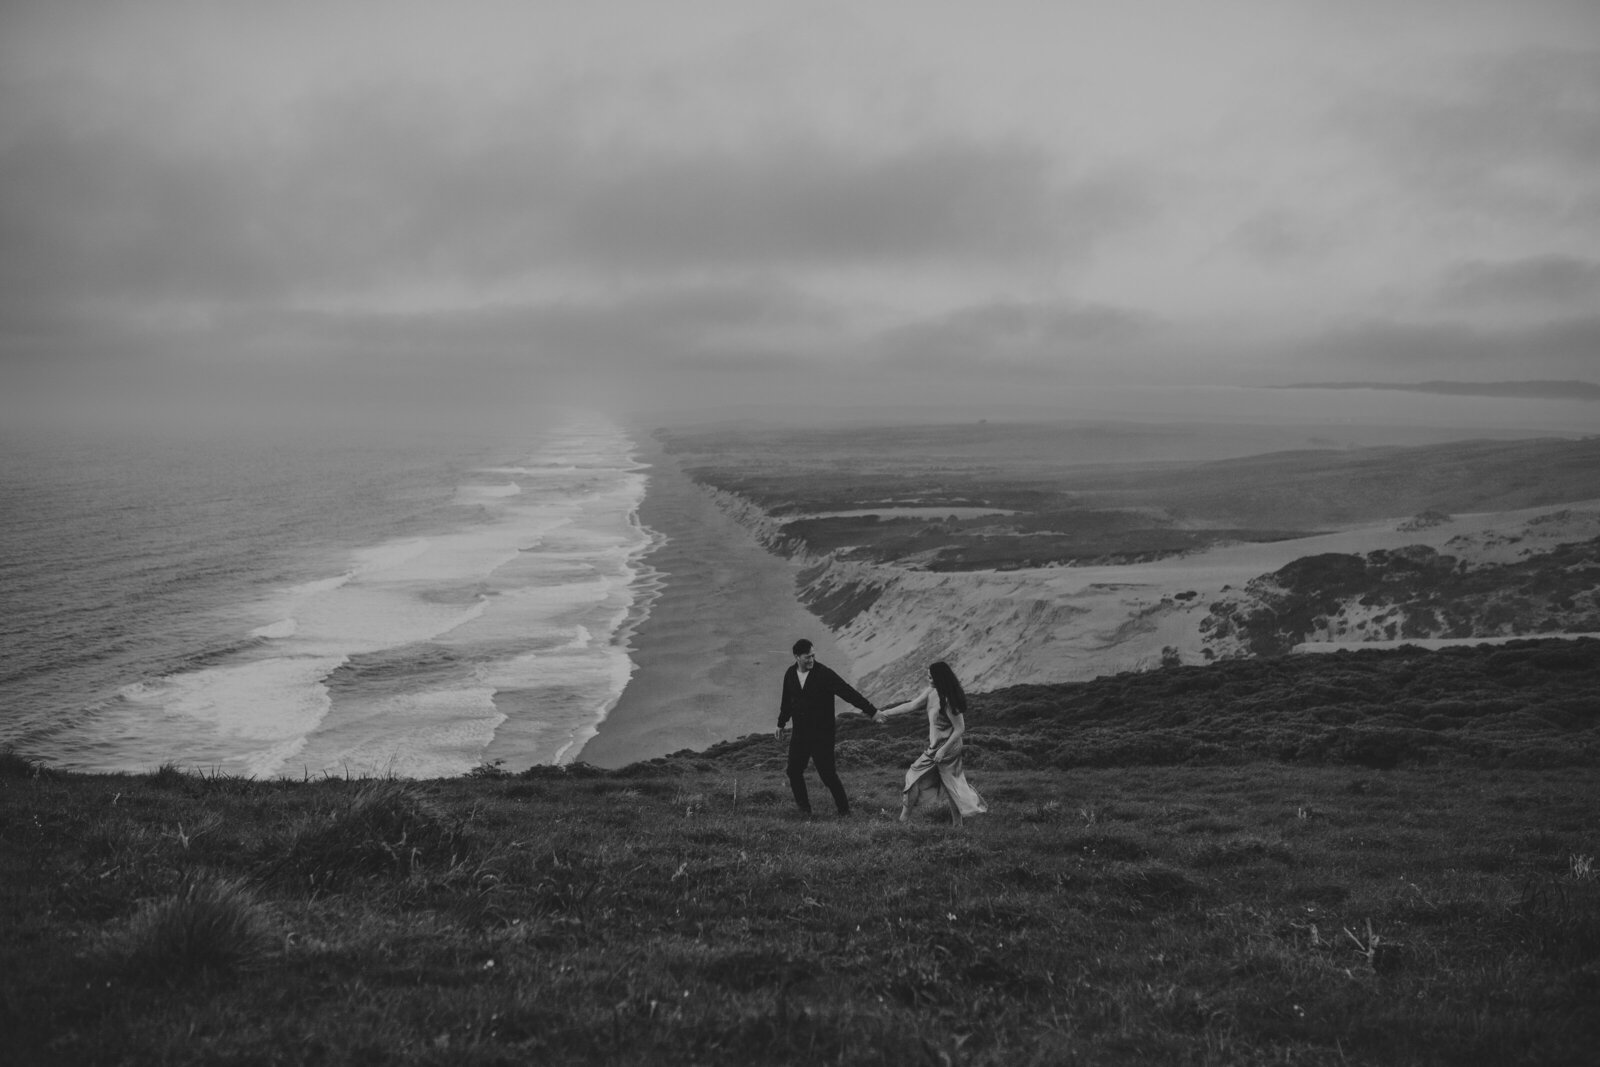 Point Reyes Engagement Session